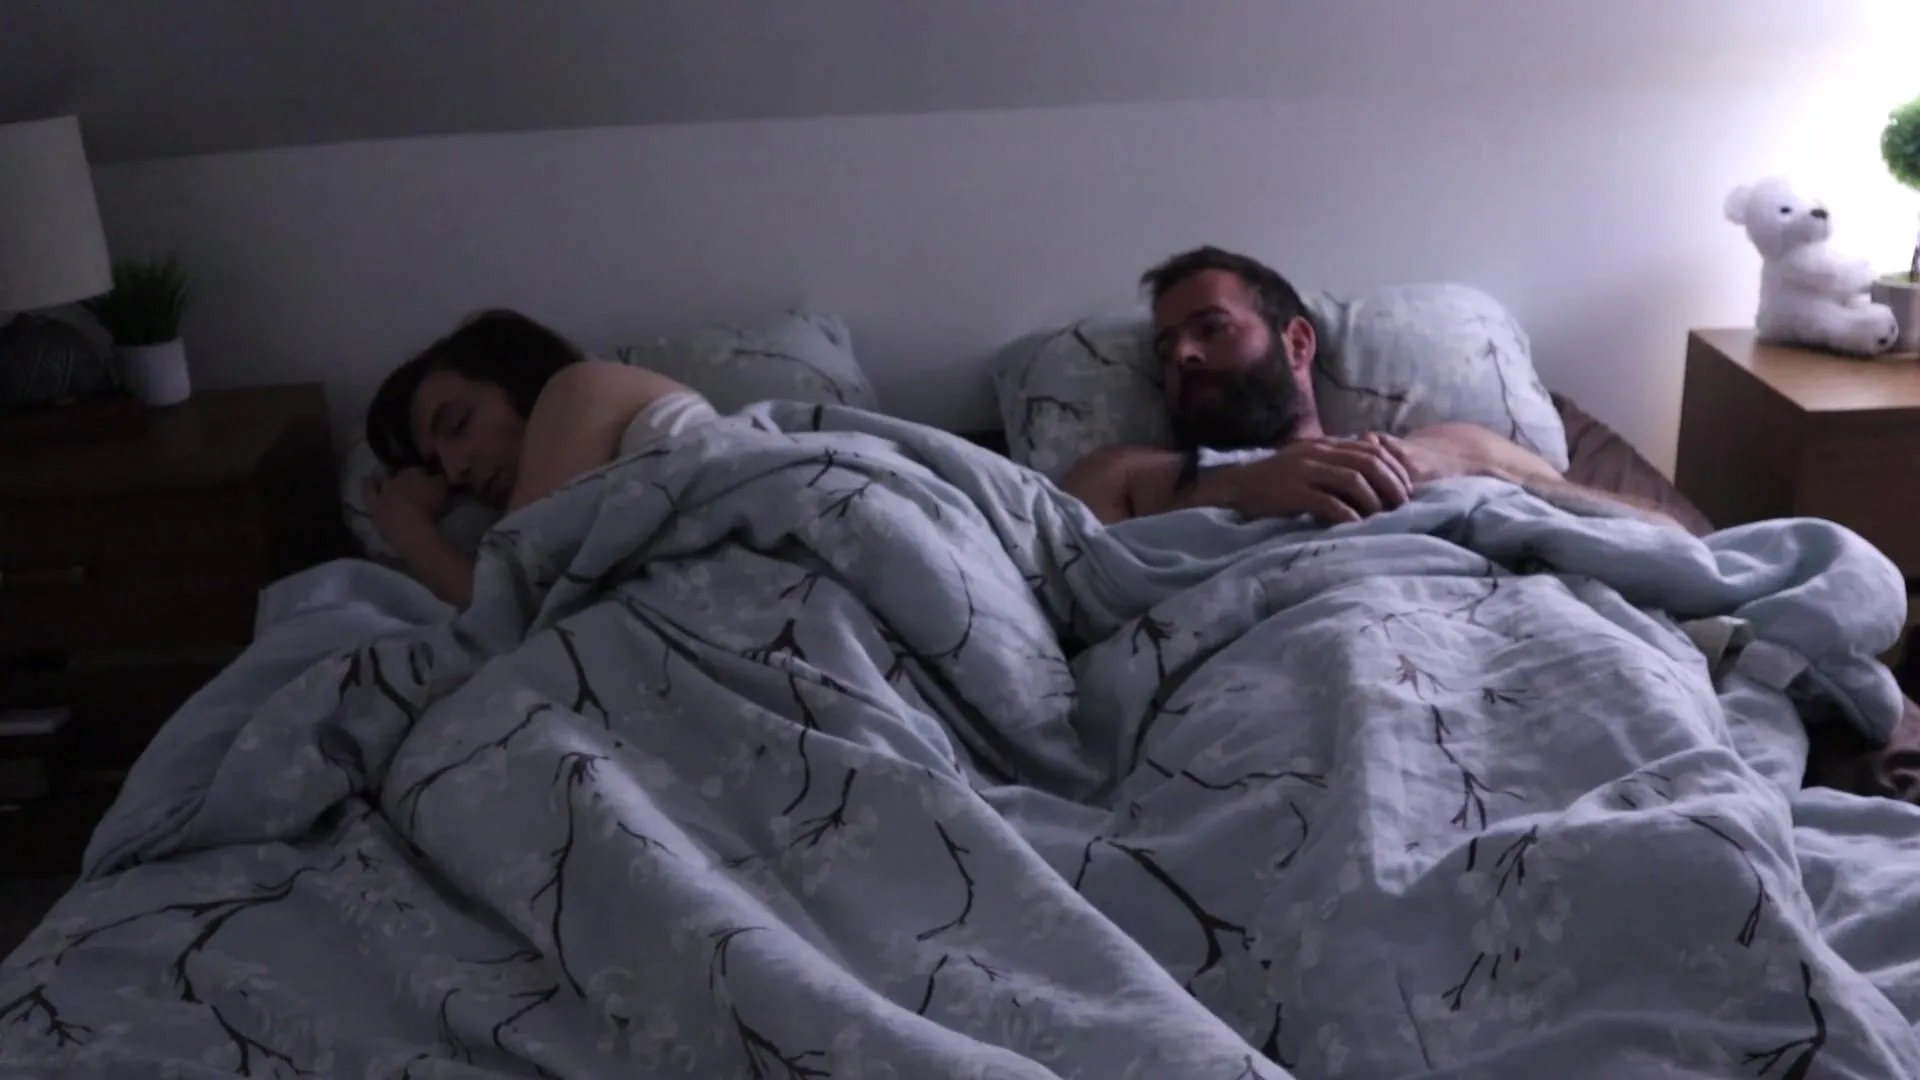 Unplanned sex sharing bed between Stepson and his Stepmom watch online